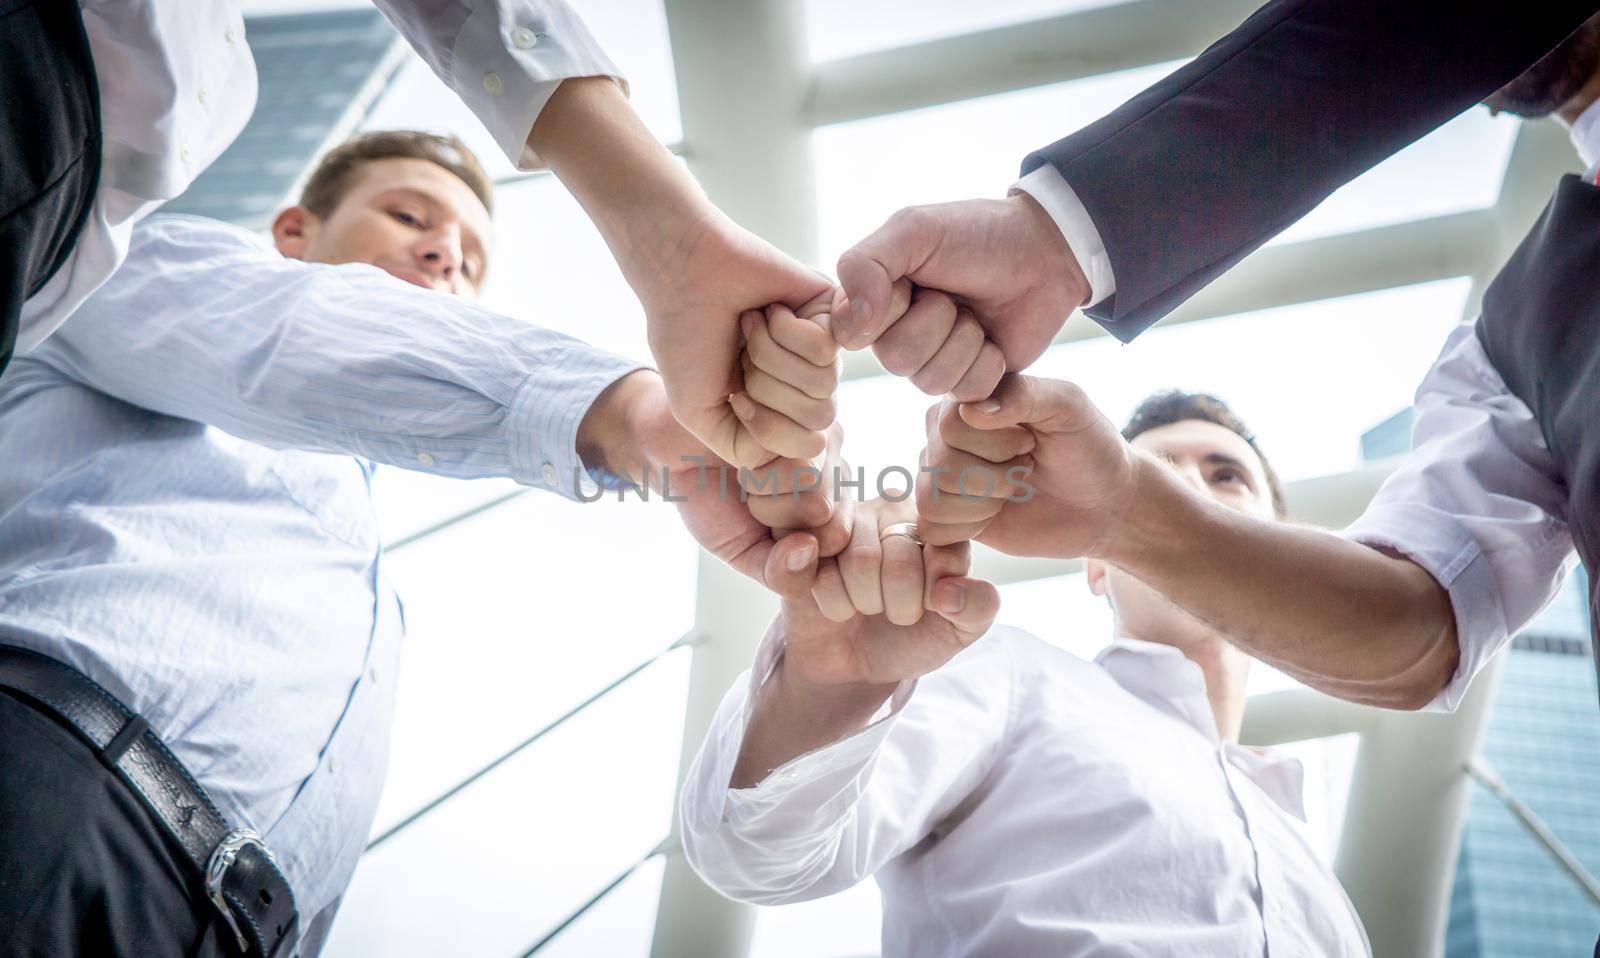 Lowsection Of Businessmen Shaking Hands, Business handshake, deal made. professionals by chuanchai